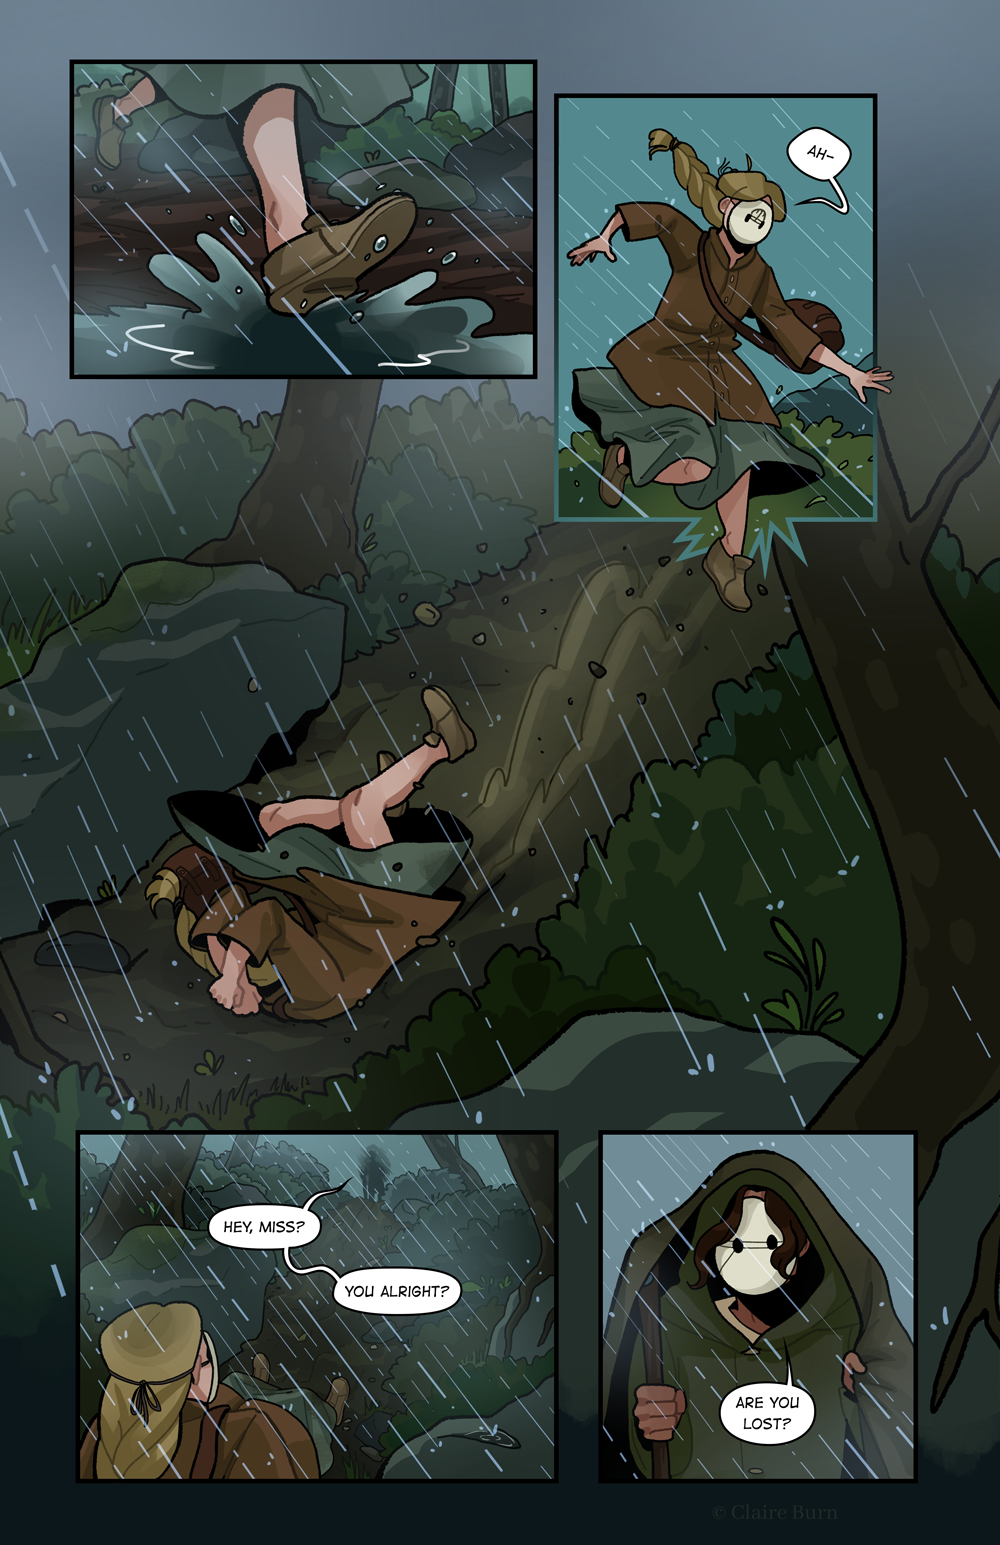 While running in a rainstorm, Halla falls down an embankment and is approached by a concerned man with a tarp (Jon).